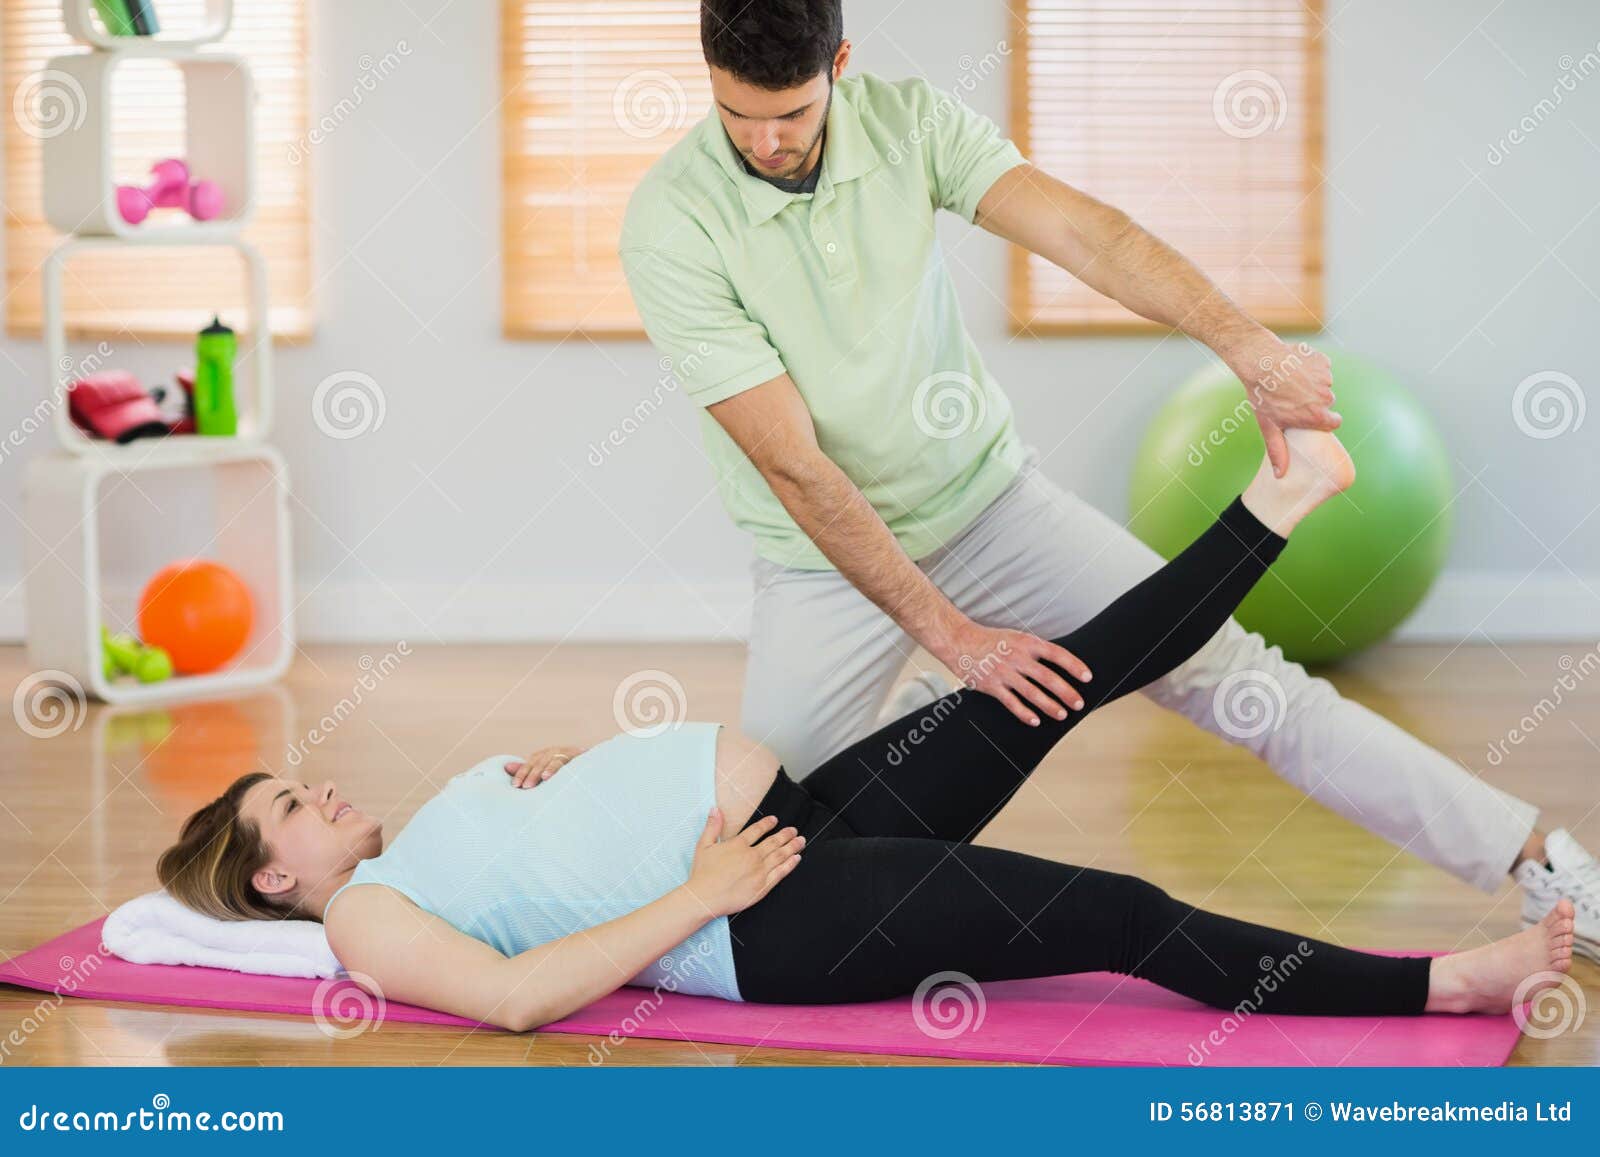 Pregnant Woman Getting Relaxing Massage Stock Image Image Of Health Leisure 56813871